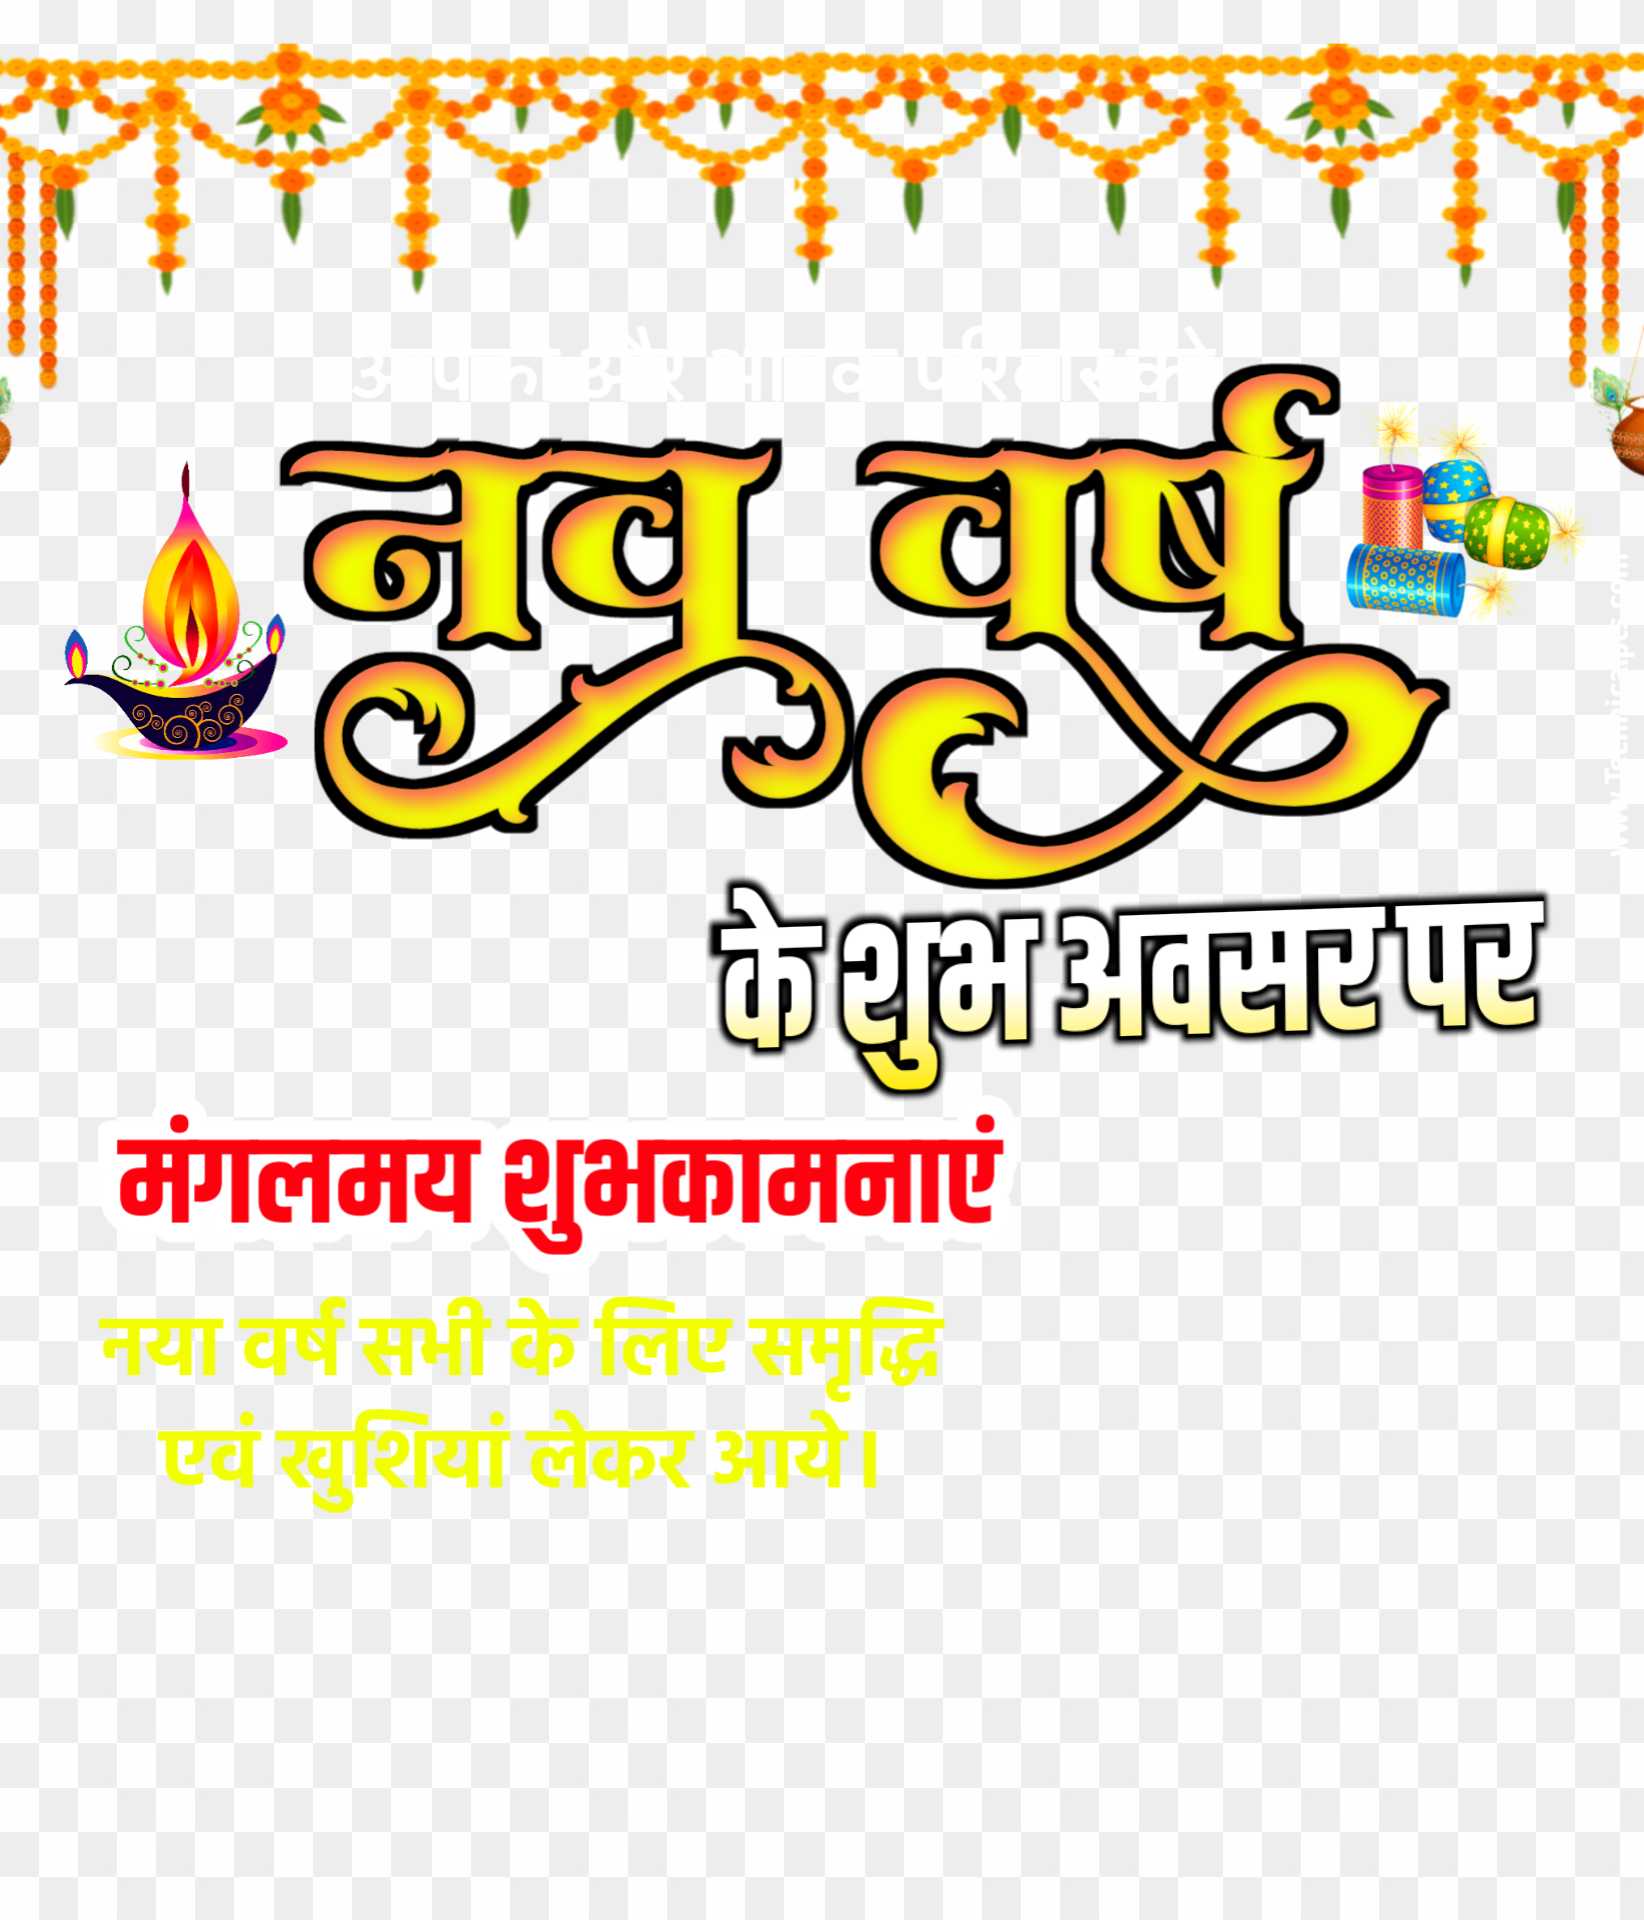 Happy new year in Hindi PNG images